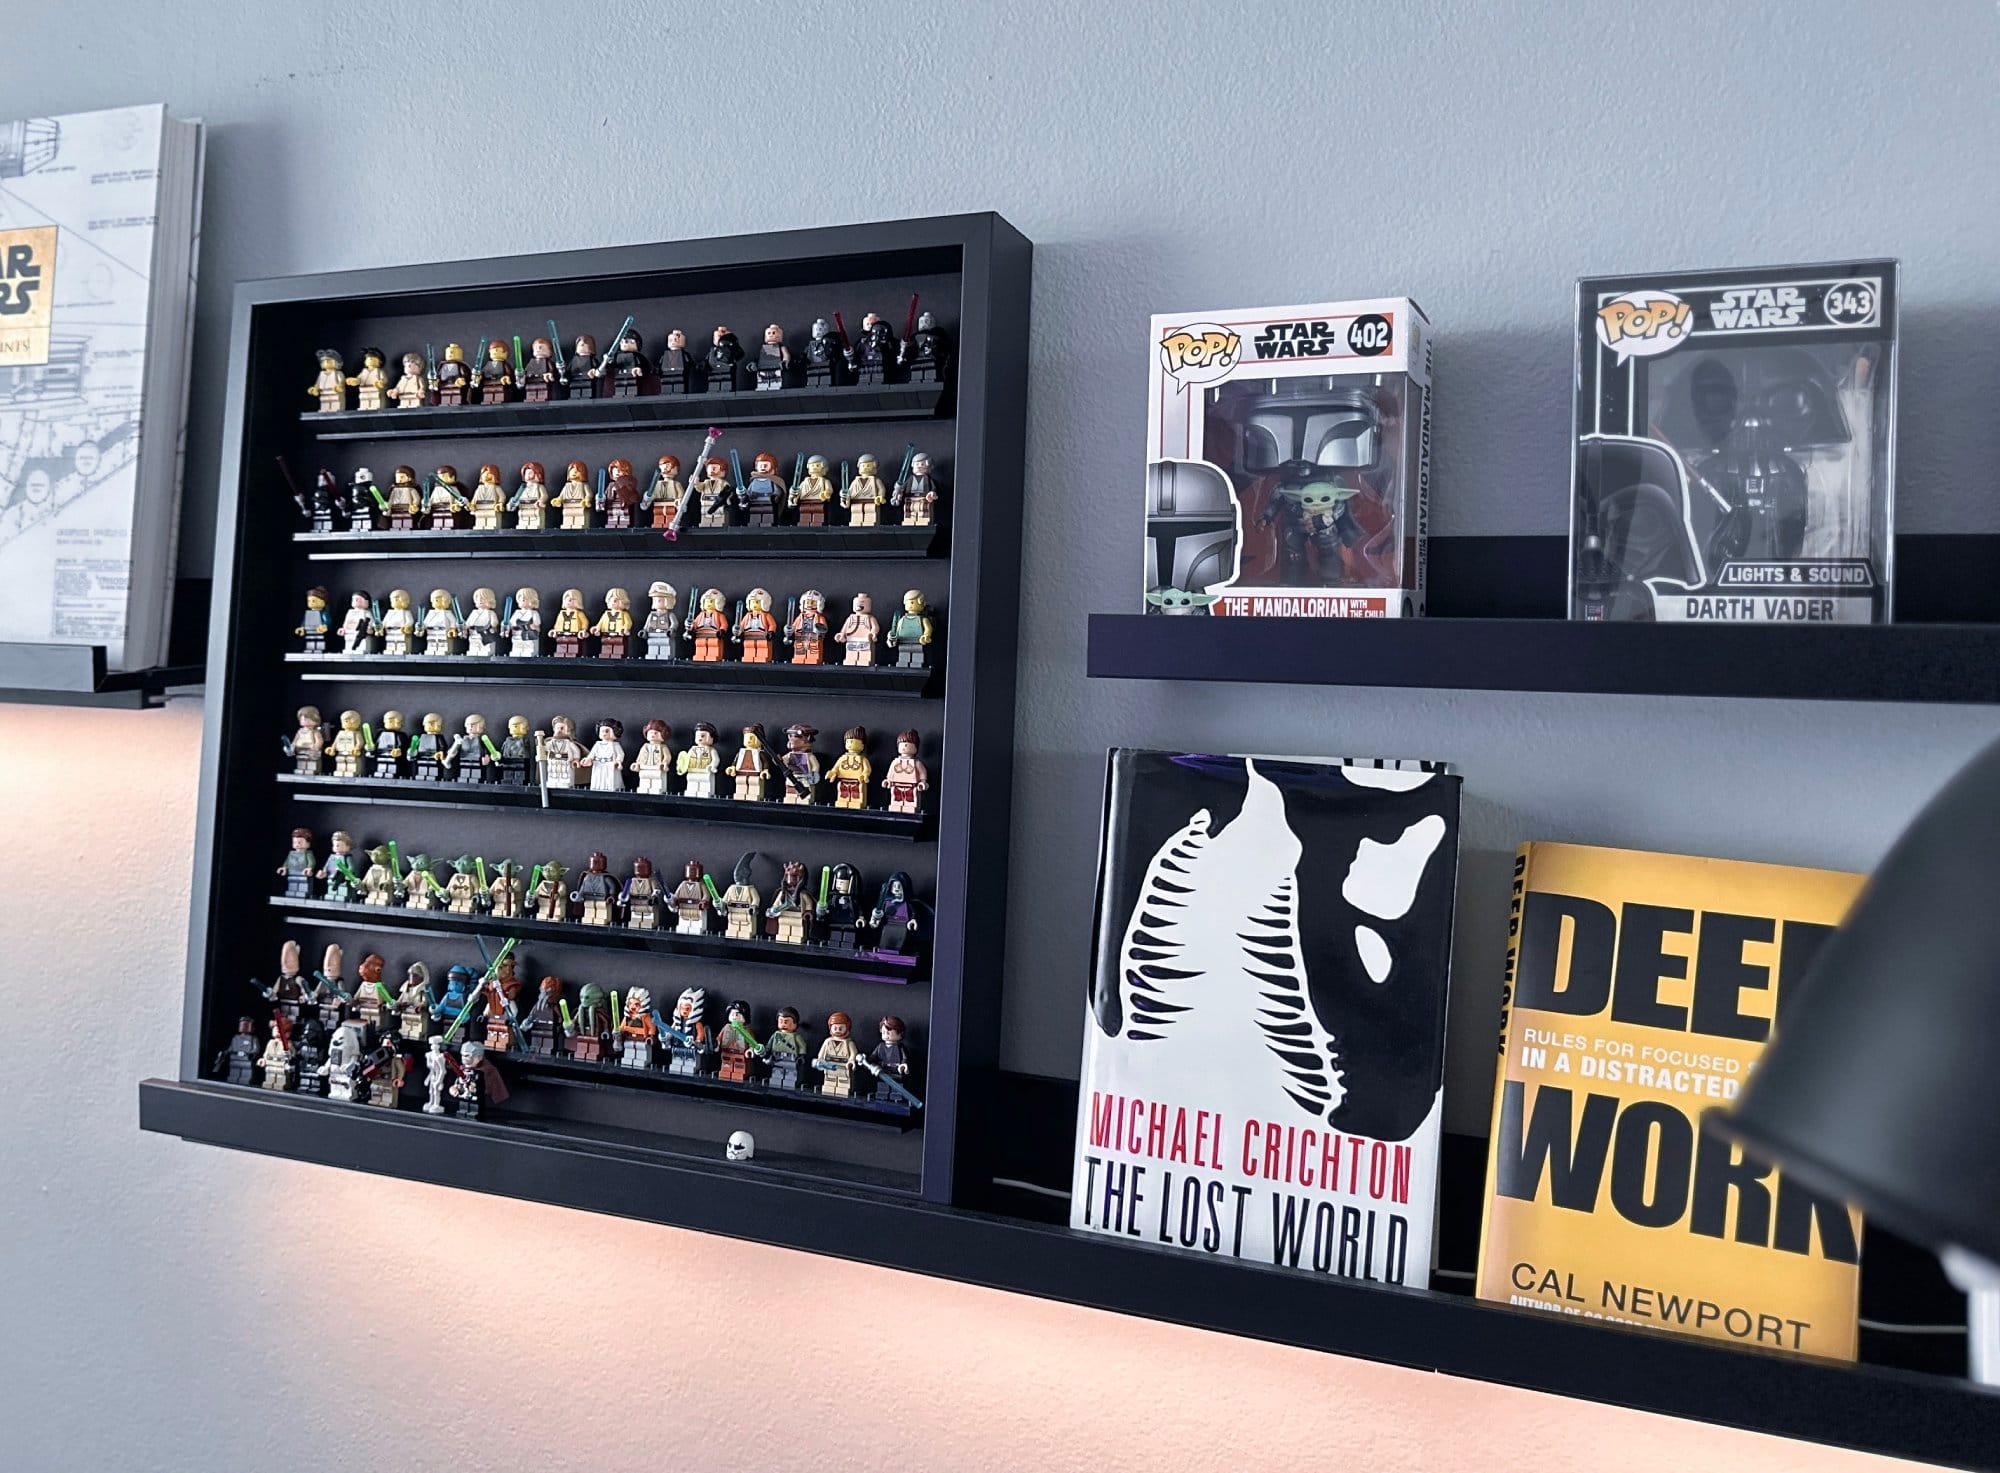 On the wall shelf, there are rows of collectible figures, two boxed figurines, and books including The Lost World by Michael Crichton and Deep Work by Cal Newport